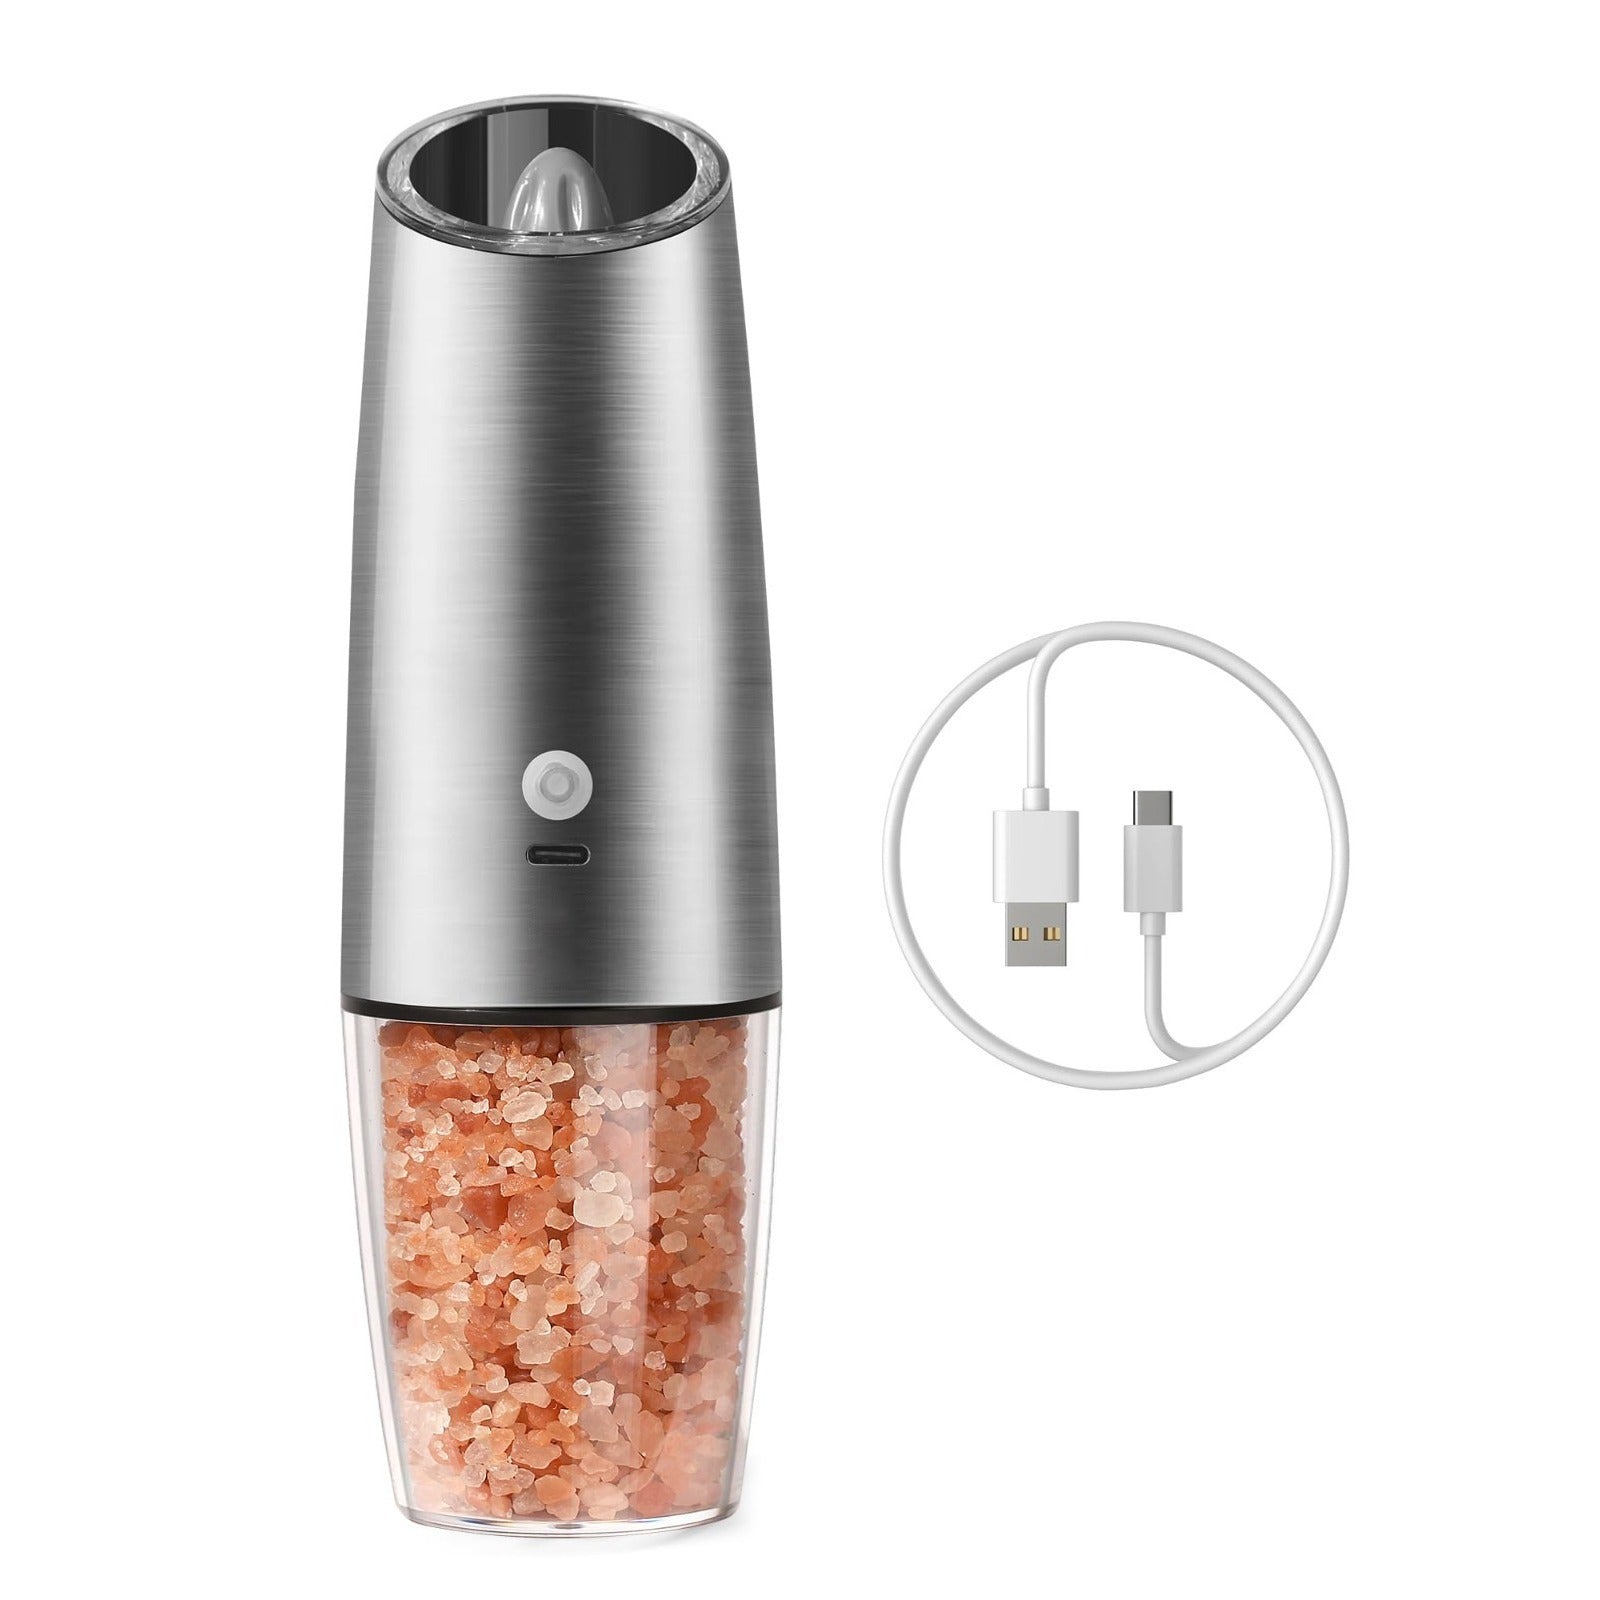 Spice Grinder Seasoning Container.